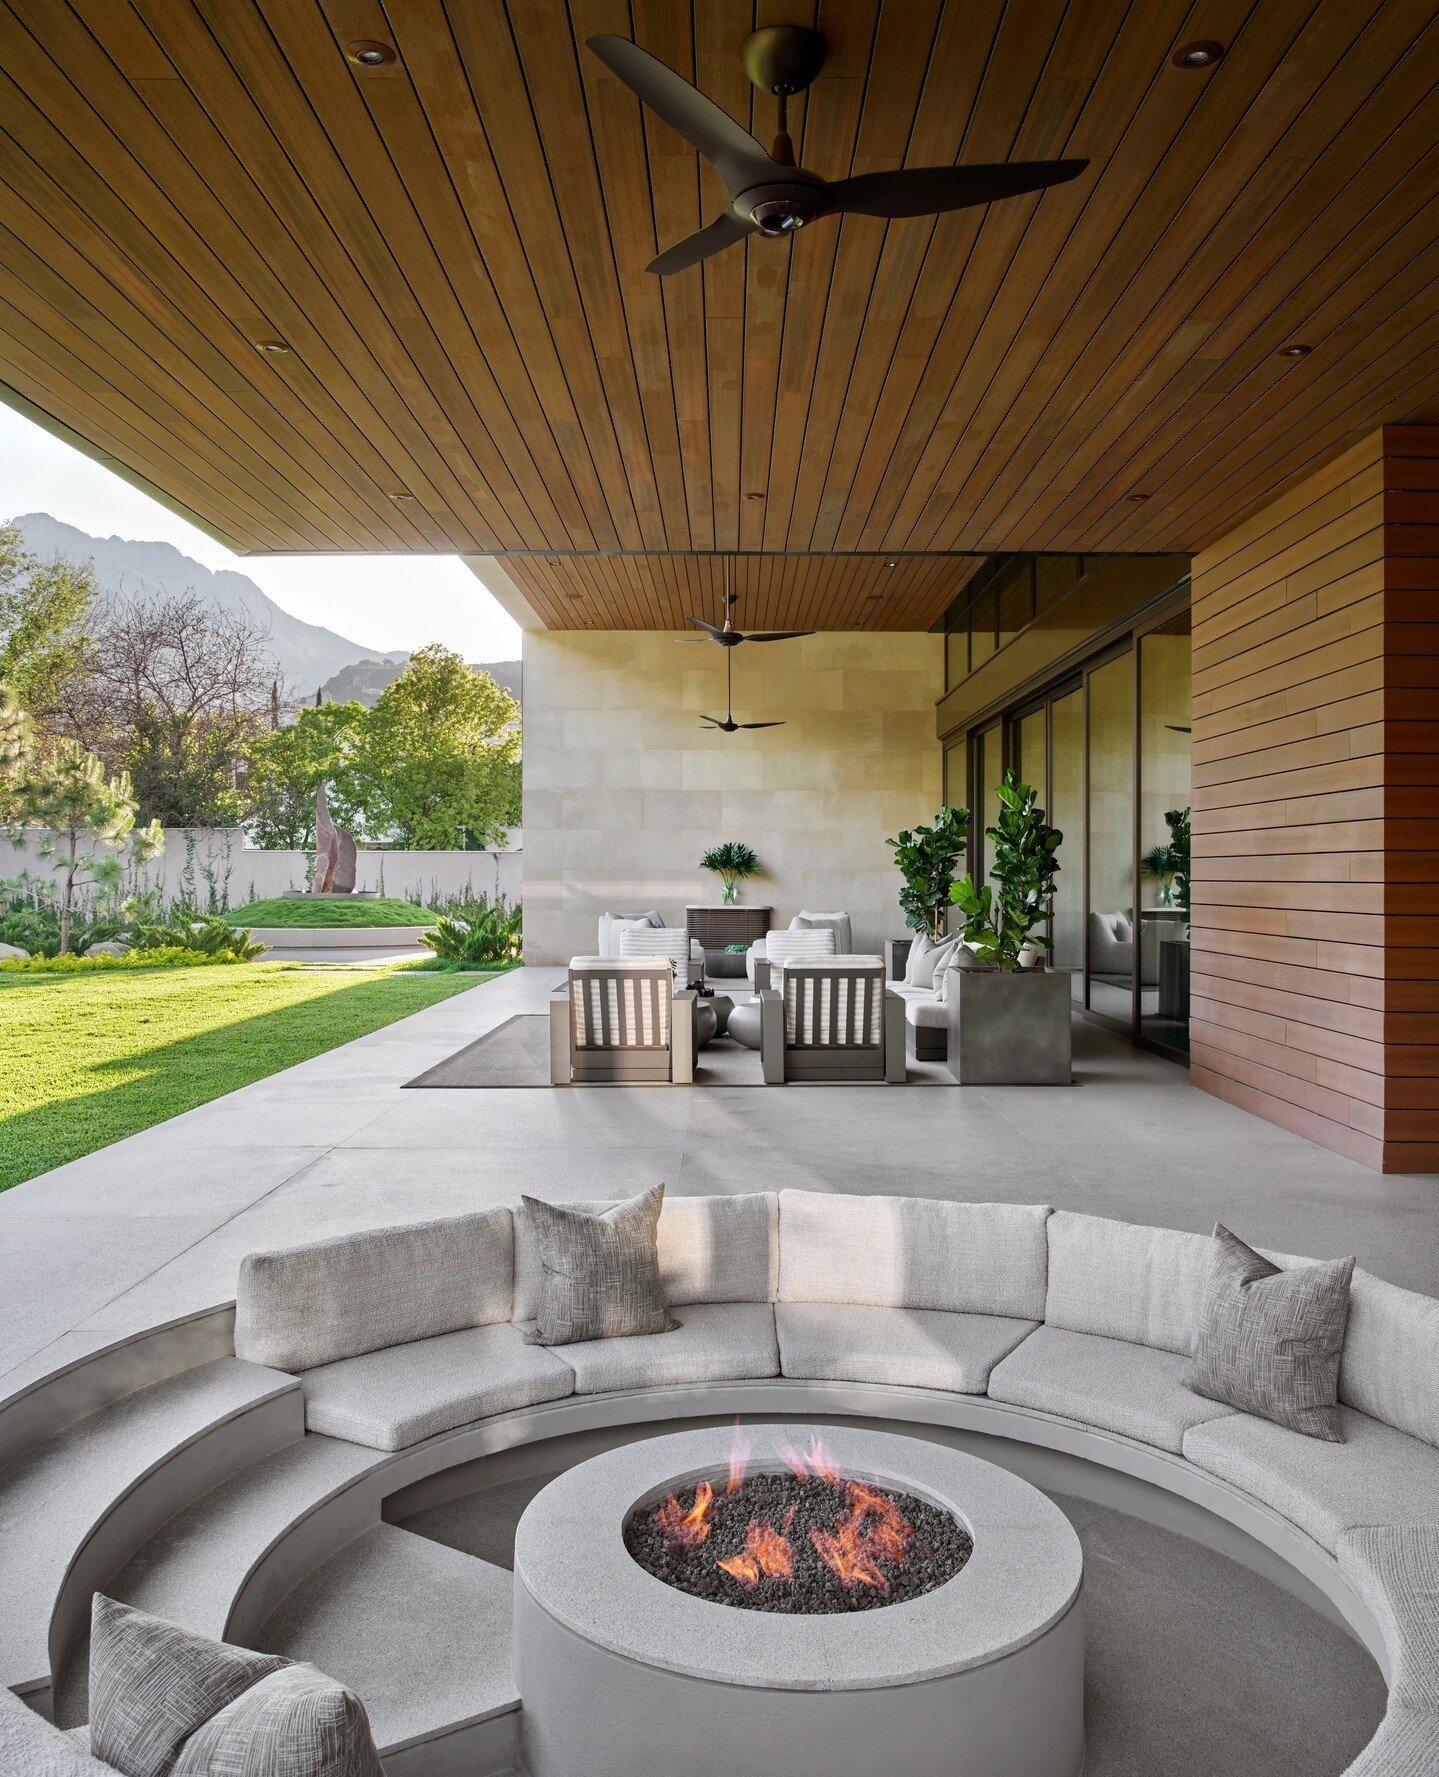 What better way to enjoy your home's property than relaxing by a chic outdoor firepit? ⁠
⁠
👈️ Swipe for some stylish firepit inspiration for your home.⁠
⁠
📸 @stephen_karlisch_photo | @solostove | @shousugibanhouse | @marionbrenner | @heatherhilliar